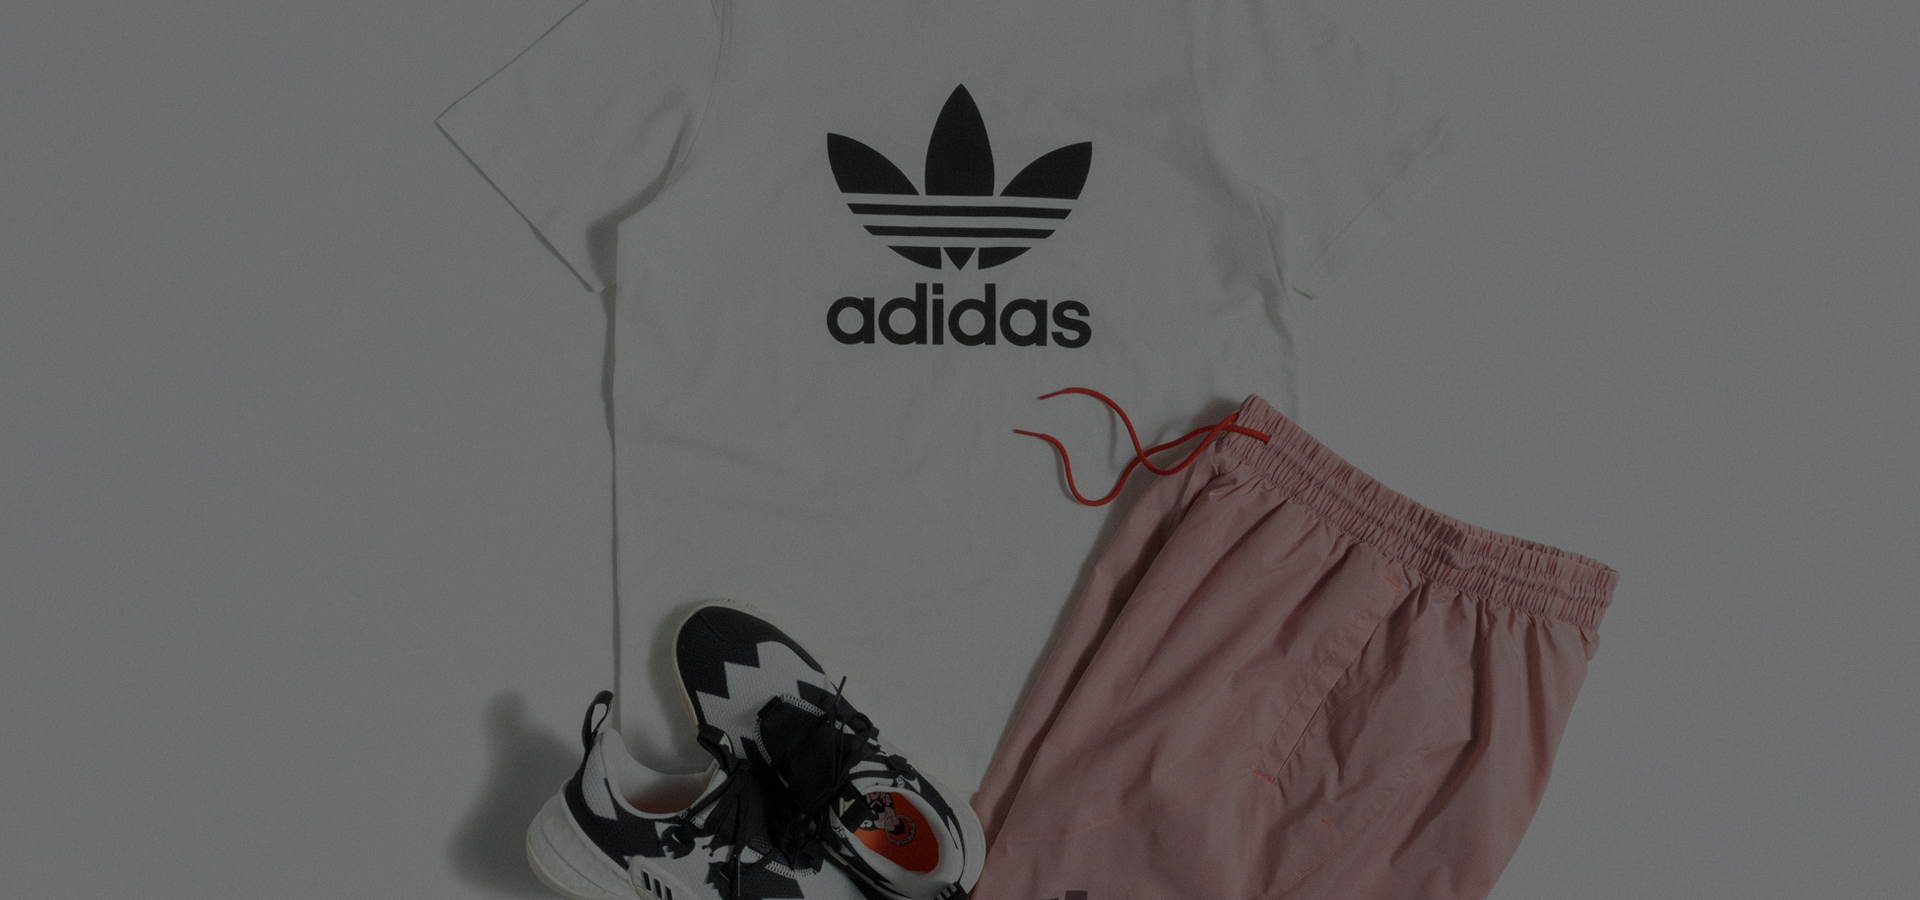 adidas apparel shopping guide march 2022 outfit 1 banner